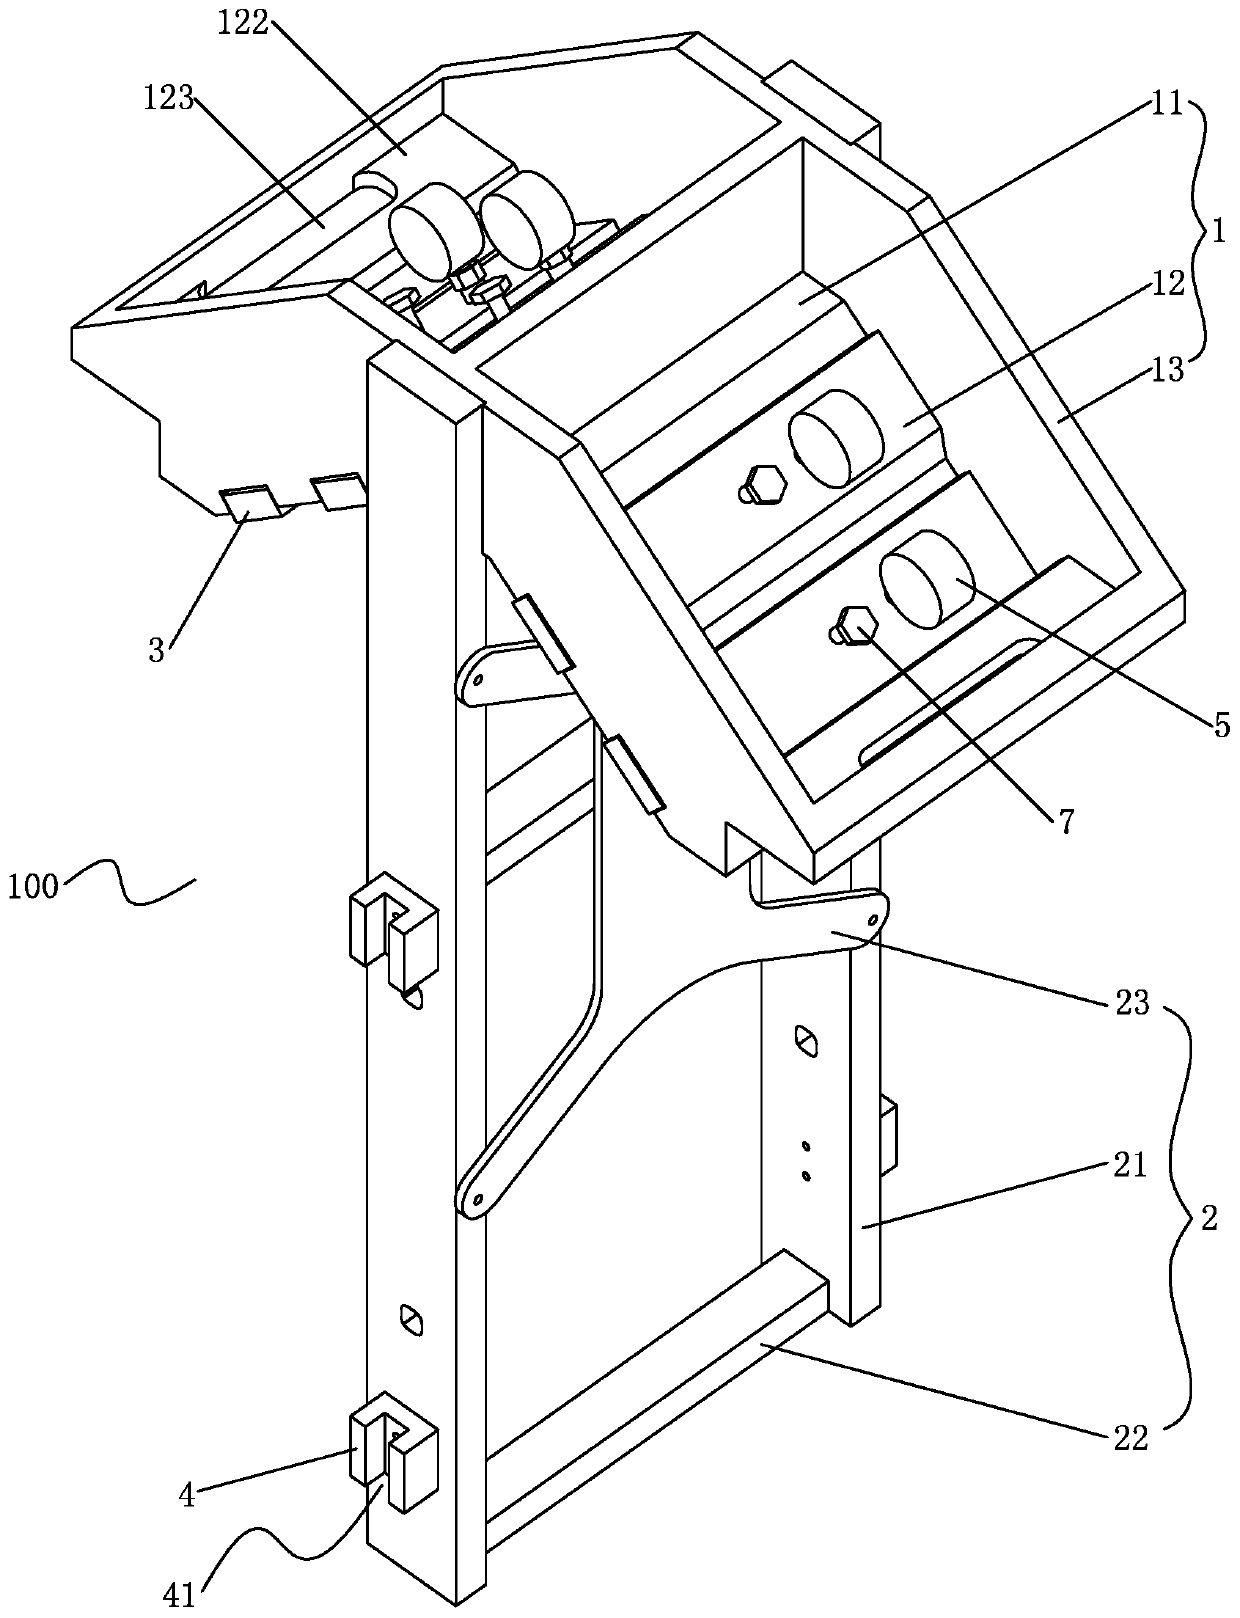 A guide rail installation and adjustment device and installation method for flat knitting machines